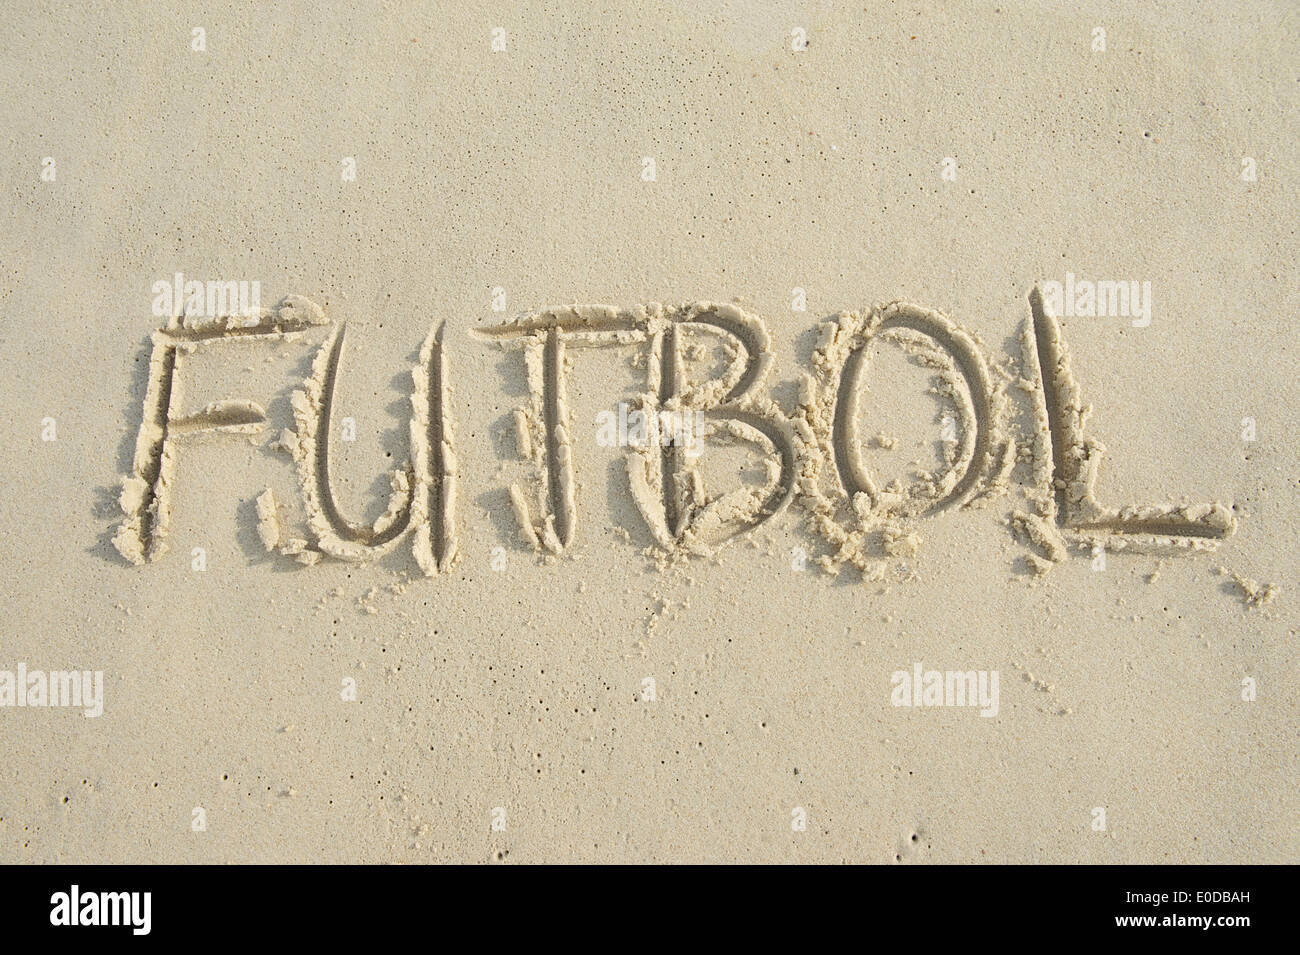 Futbol football handwritten soccer message in capital letter text on bright sunny South American sand beach Stock Photo